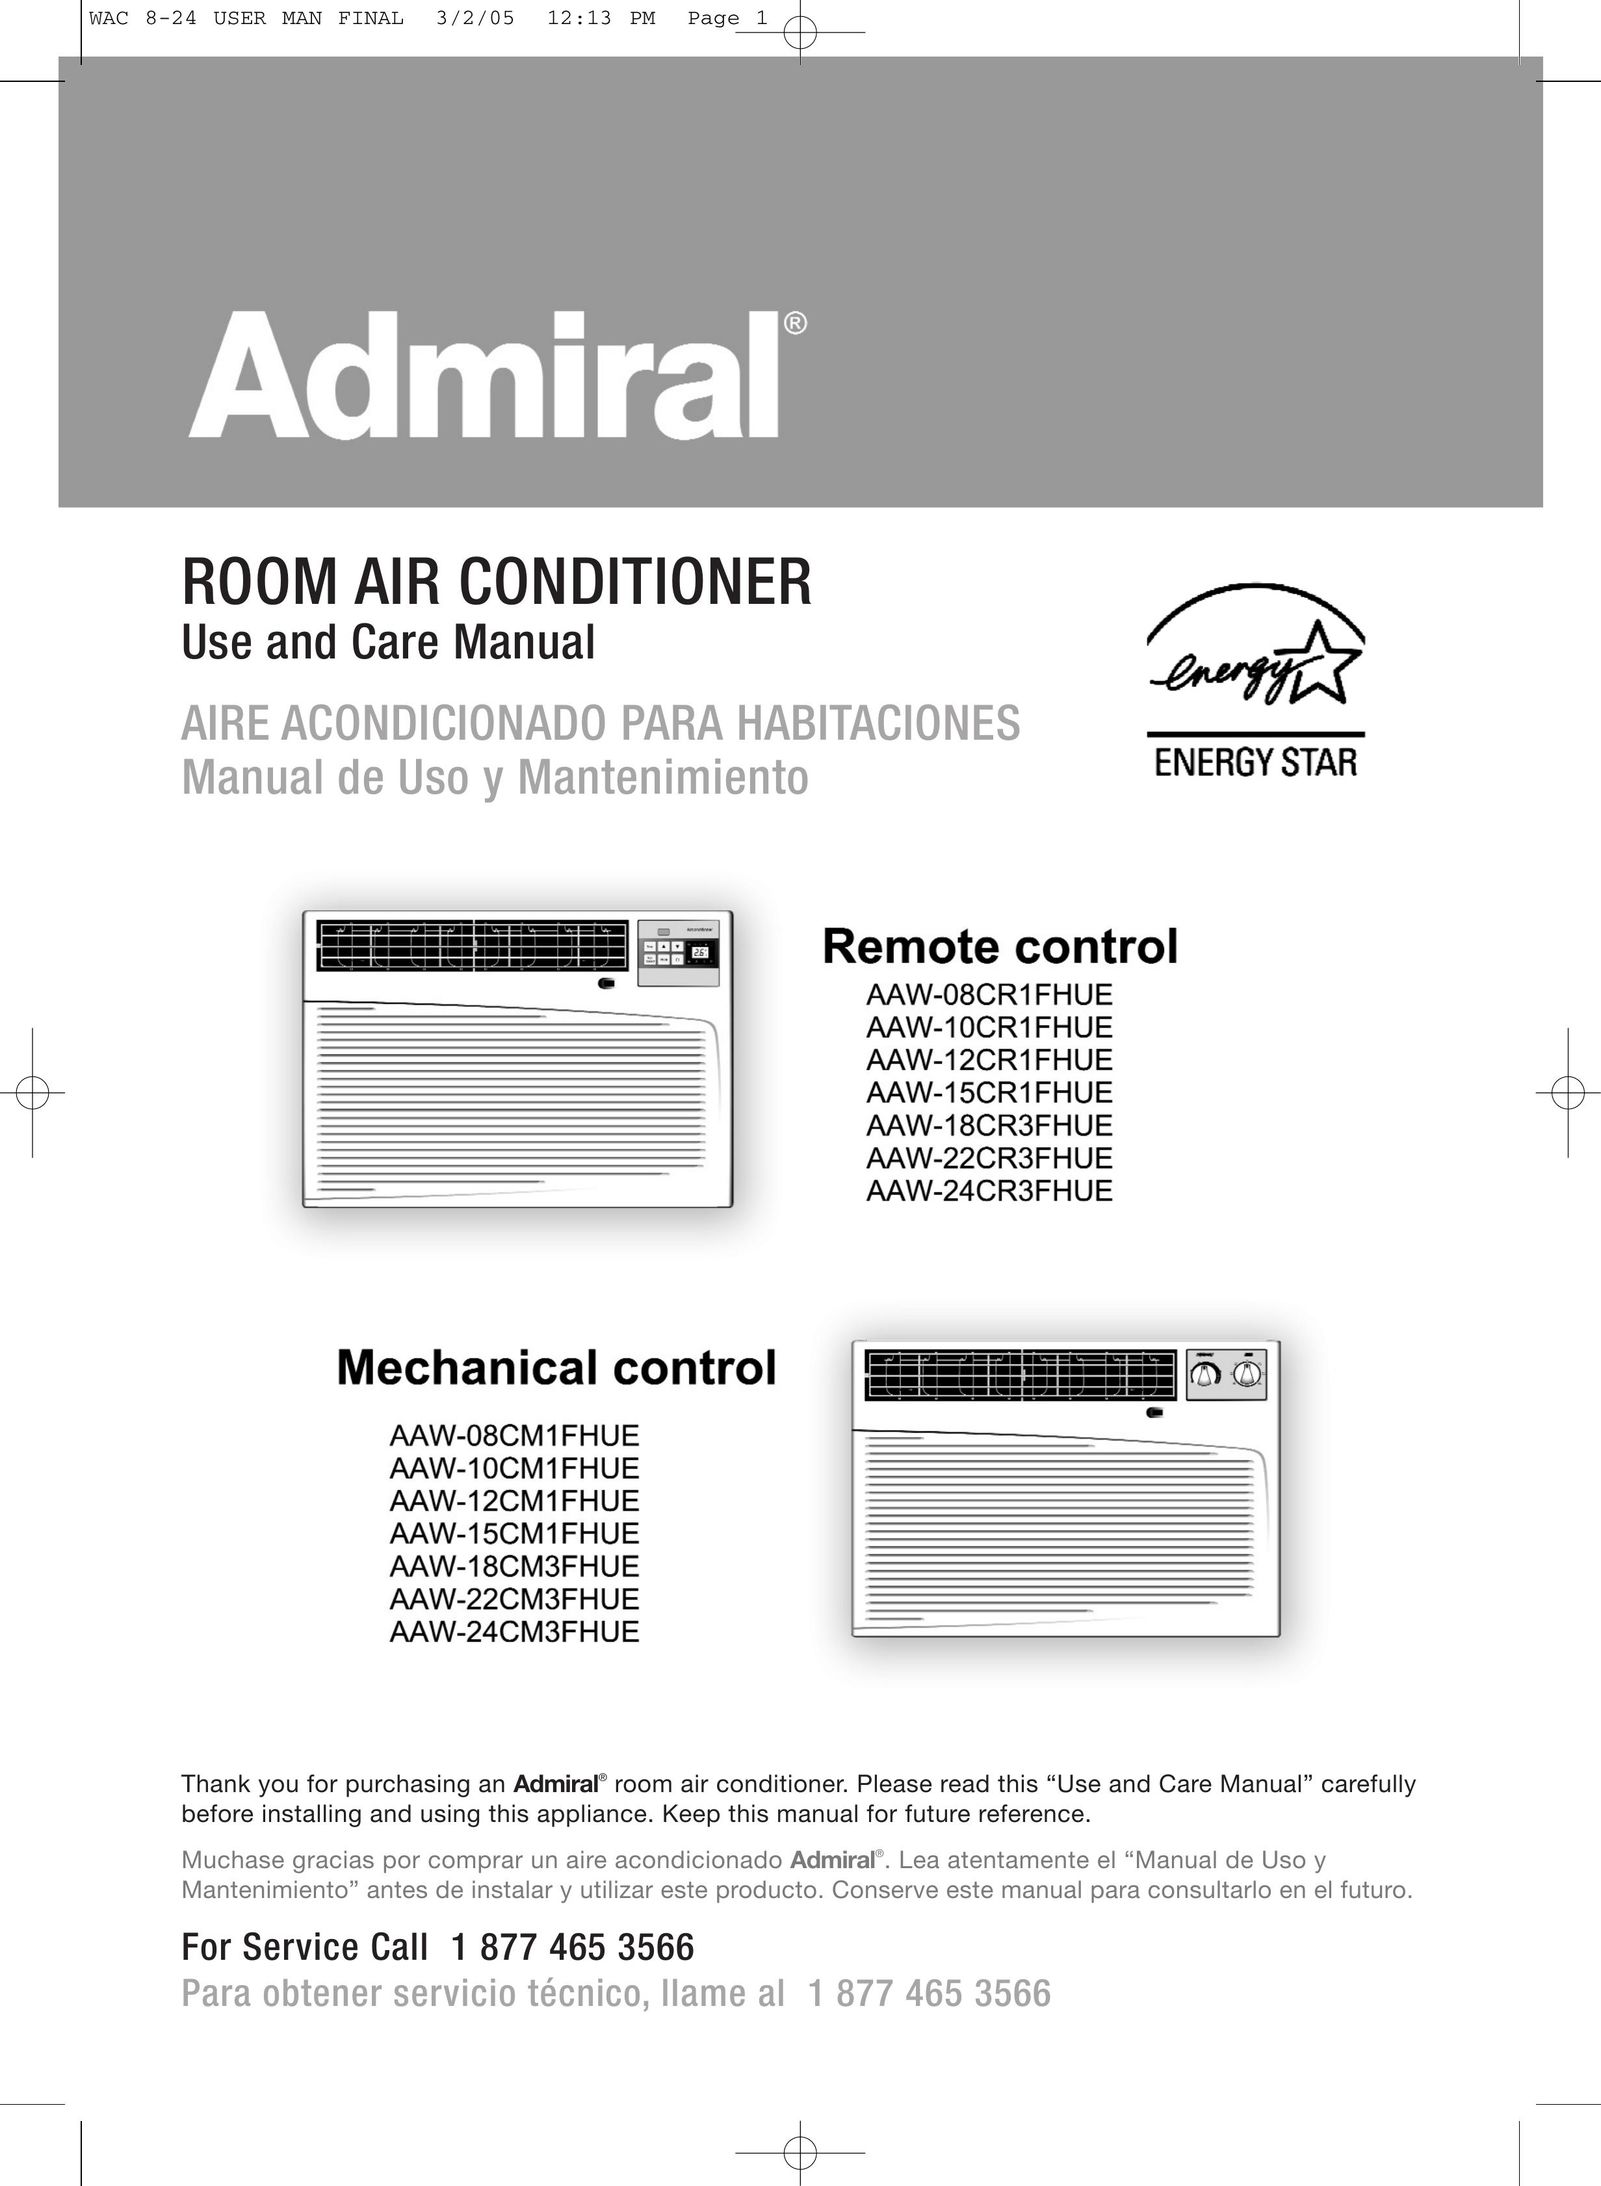 Admiral AAW-10CR1FHUE Air Conditioner User Manual